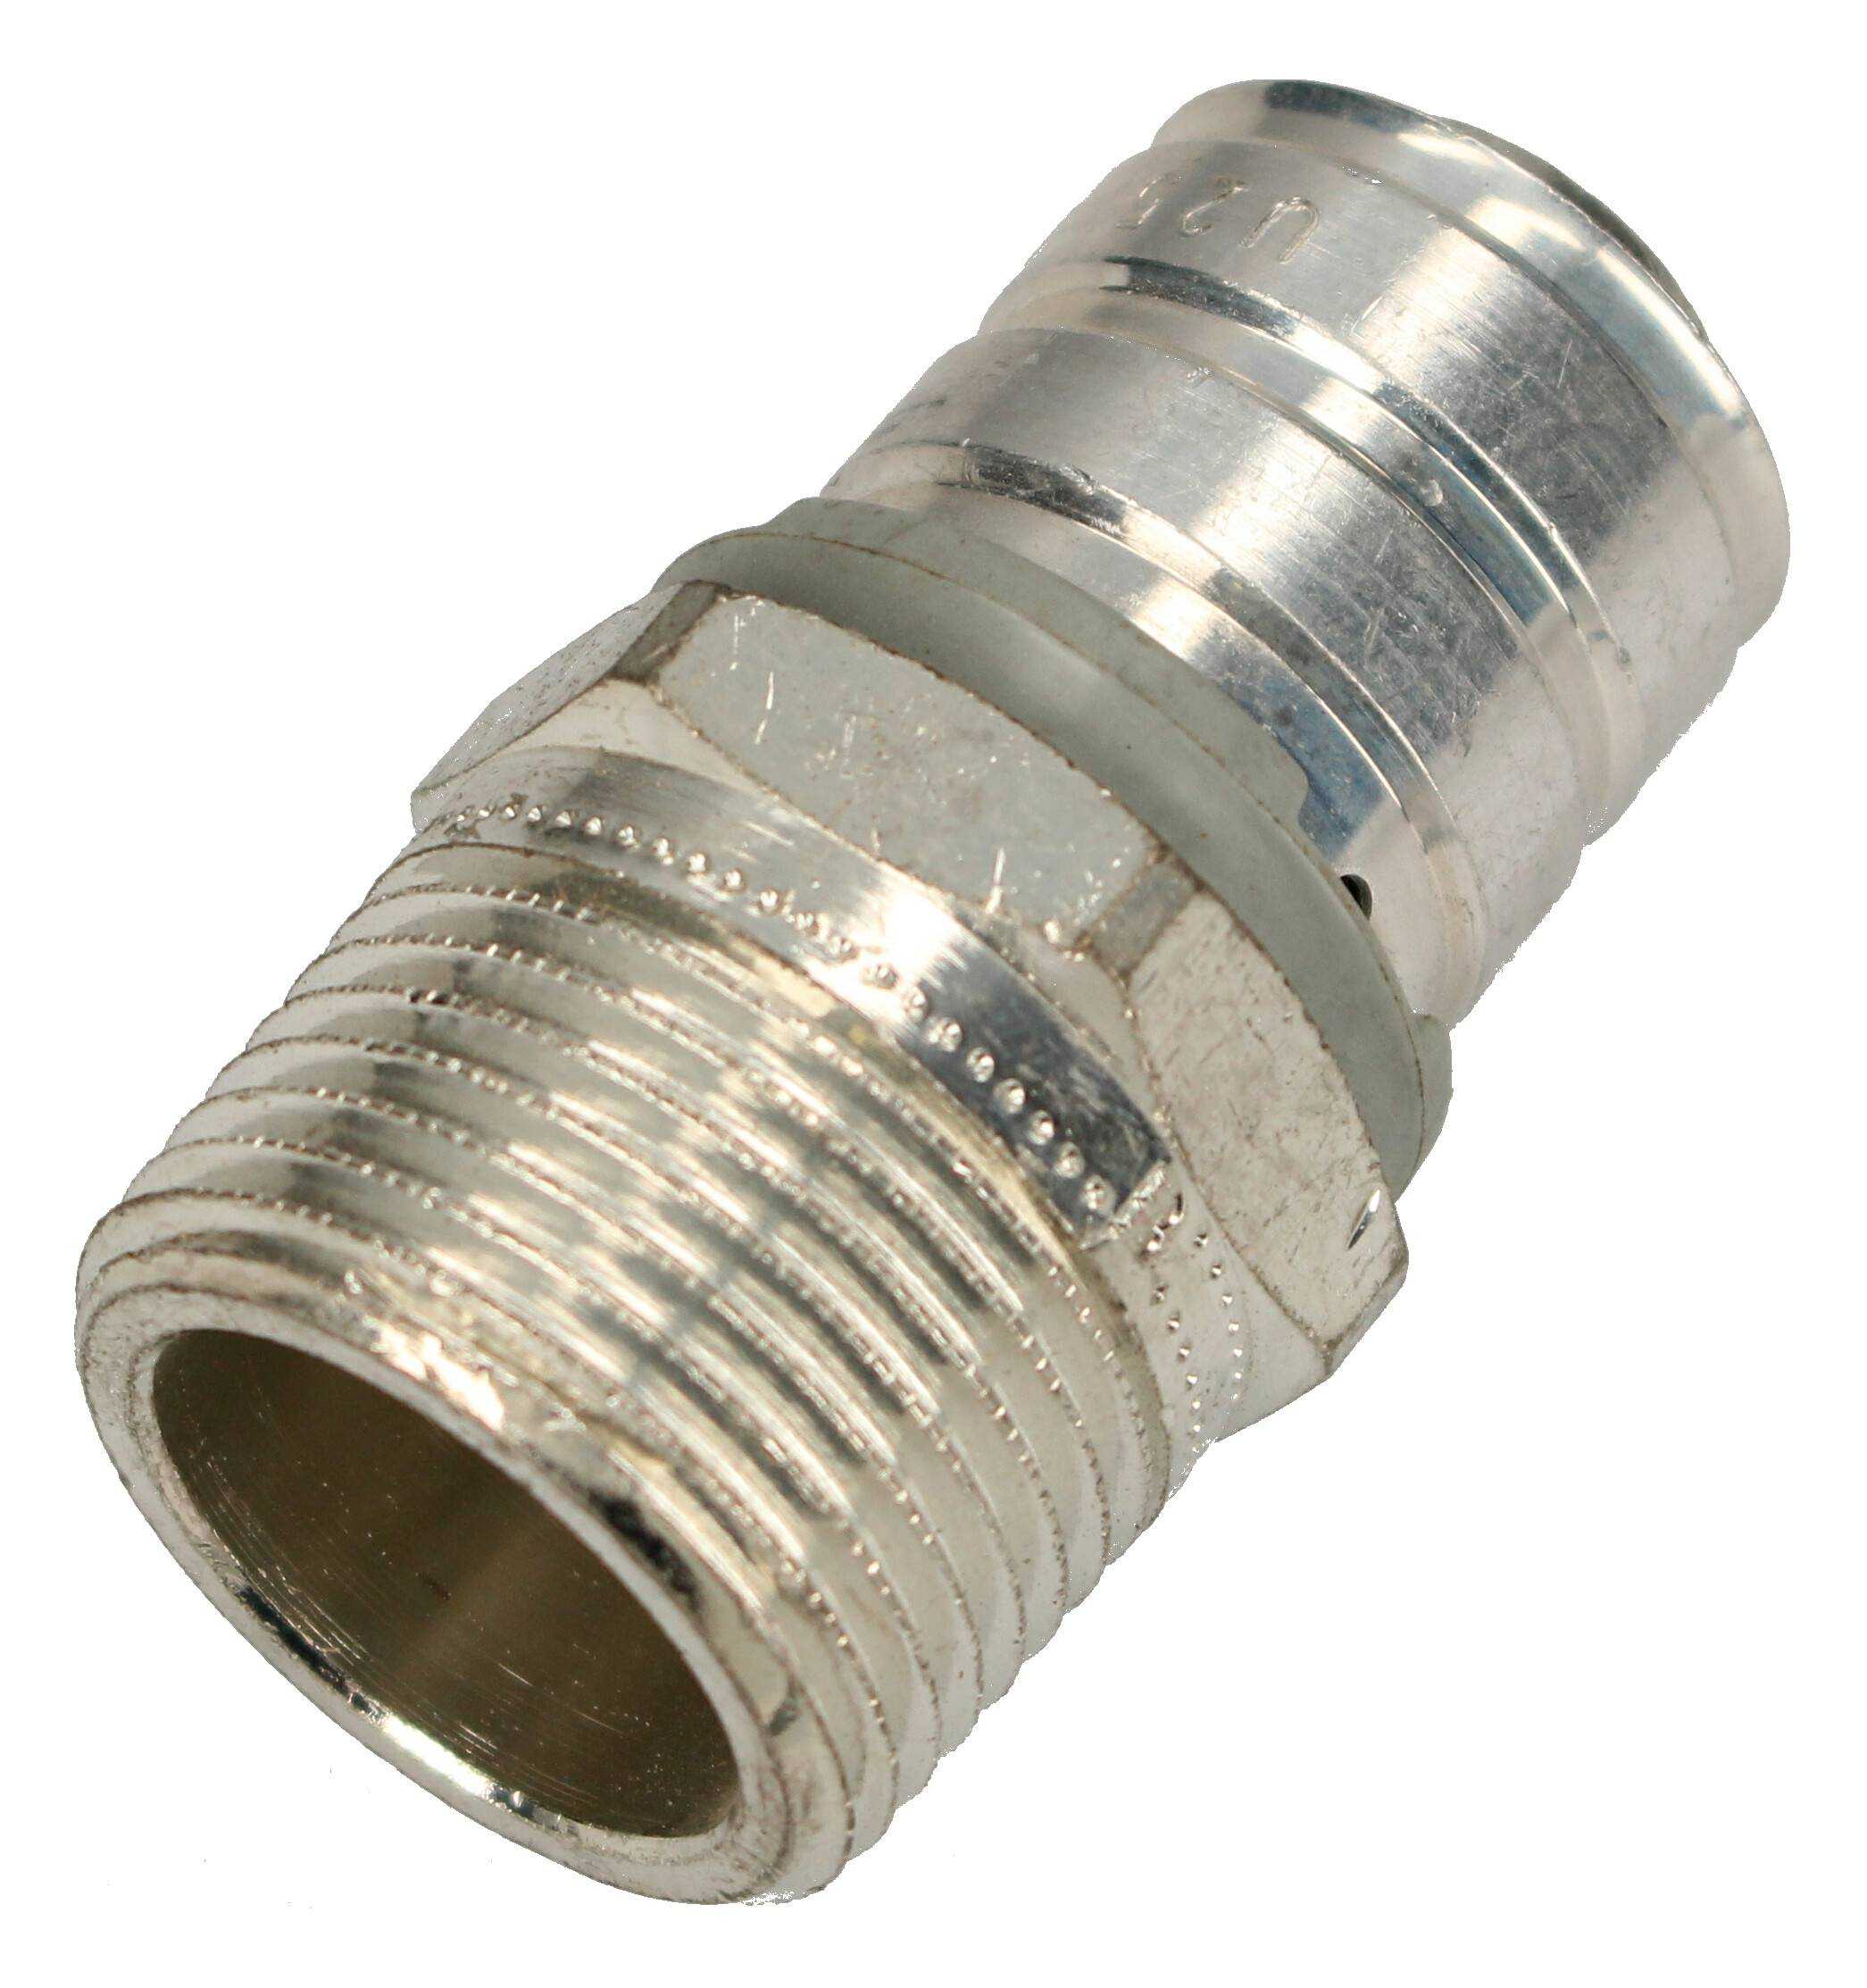 PRESSED FITTING MALE THREAD 25mm-1" - Image 1